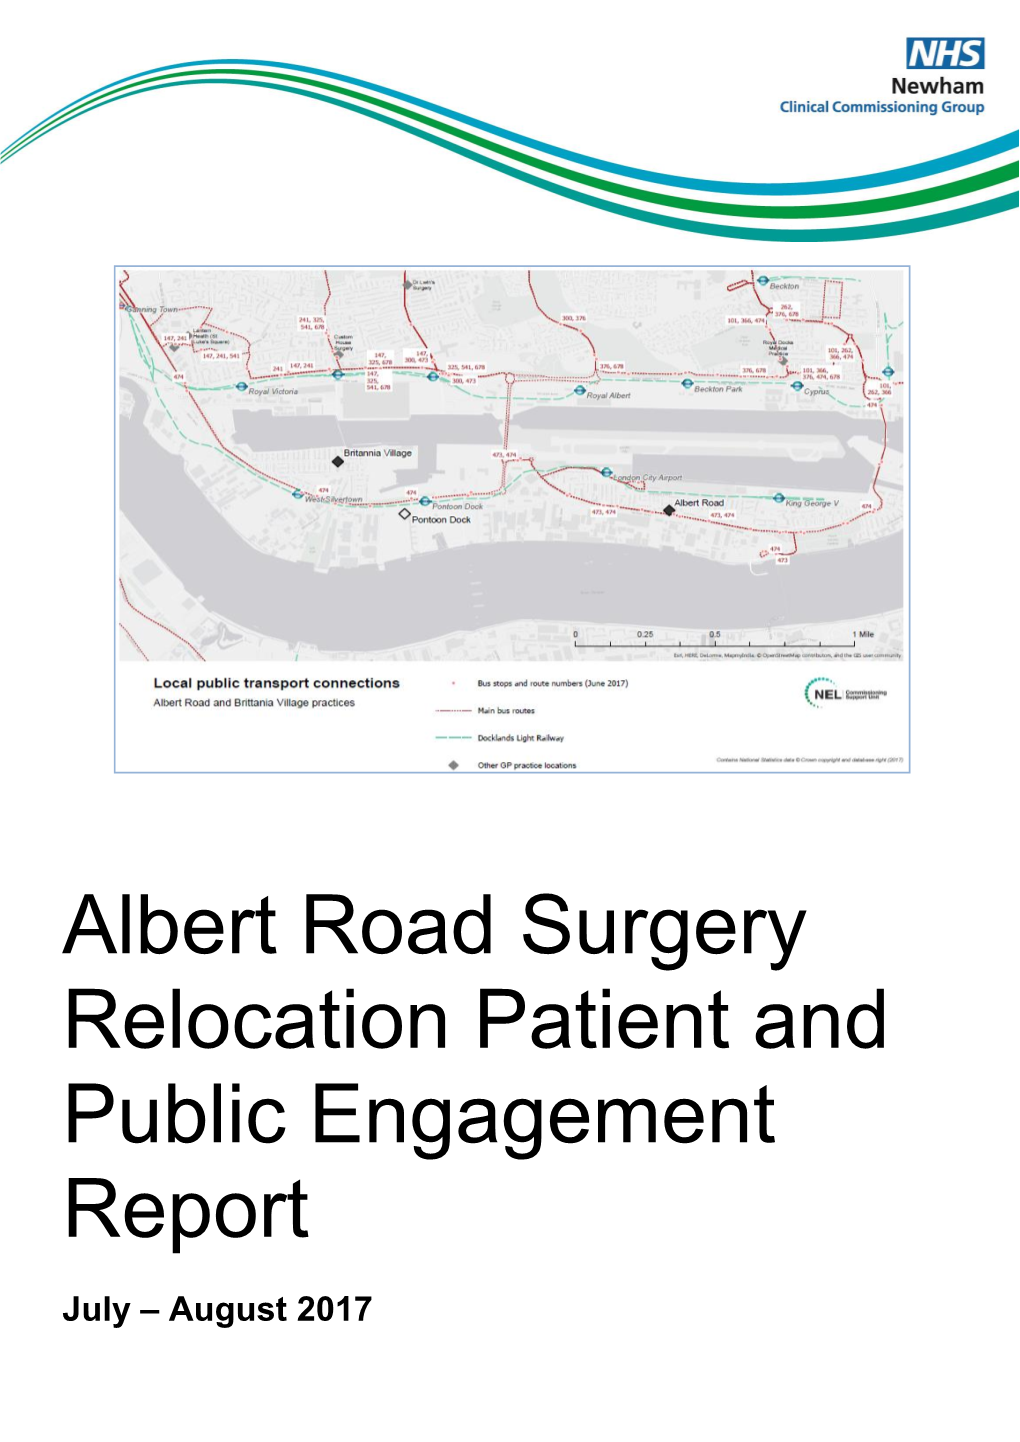 Albert Road Surgery Relocation Patient and Public Engagement Report